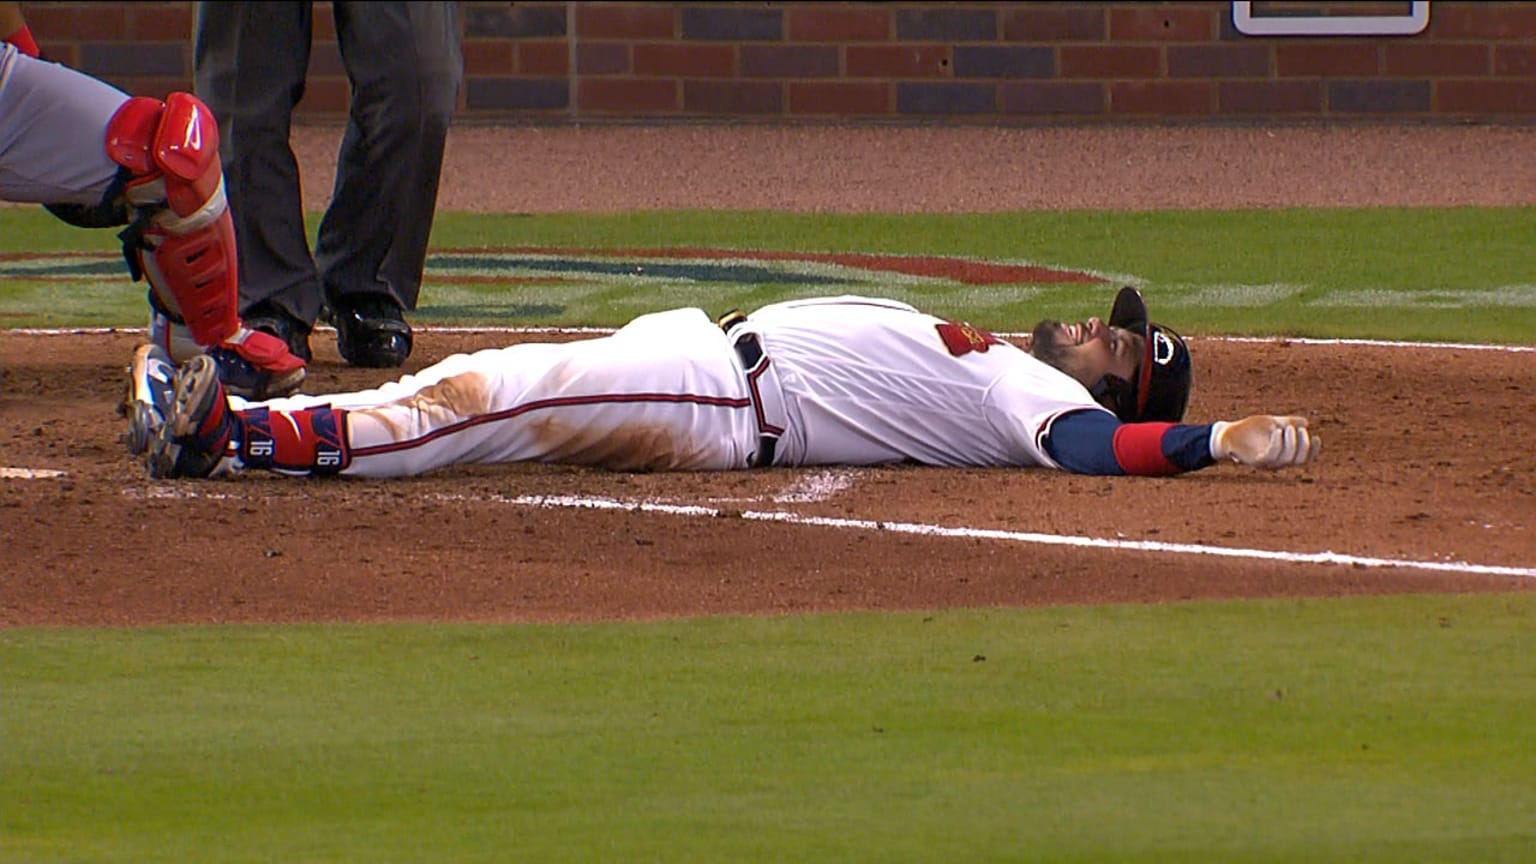 d'Arnaud plays dead after HBP, 04/13/2022